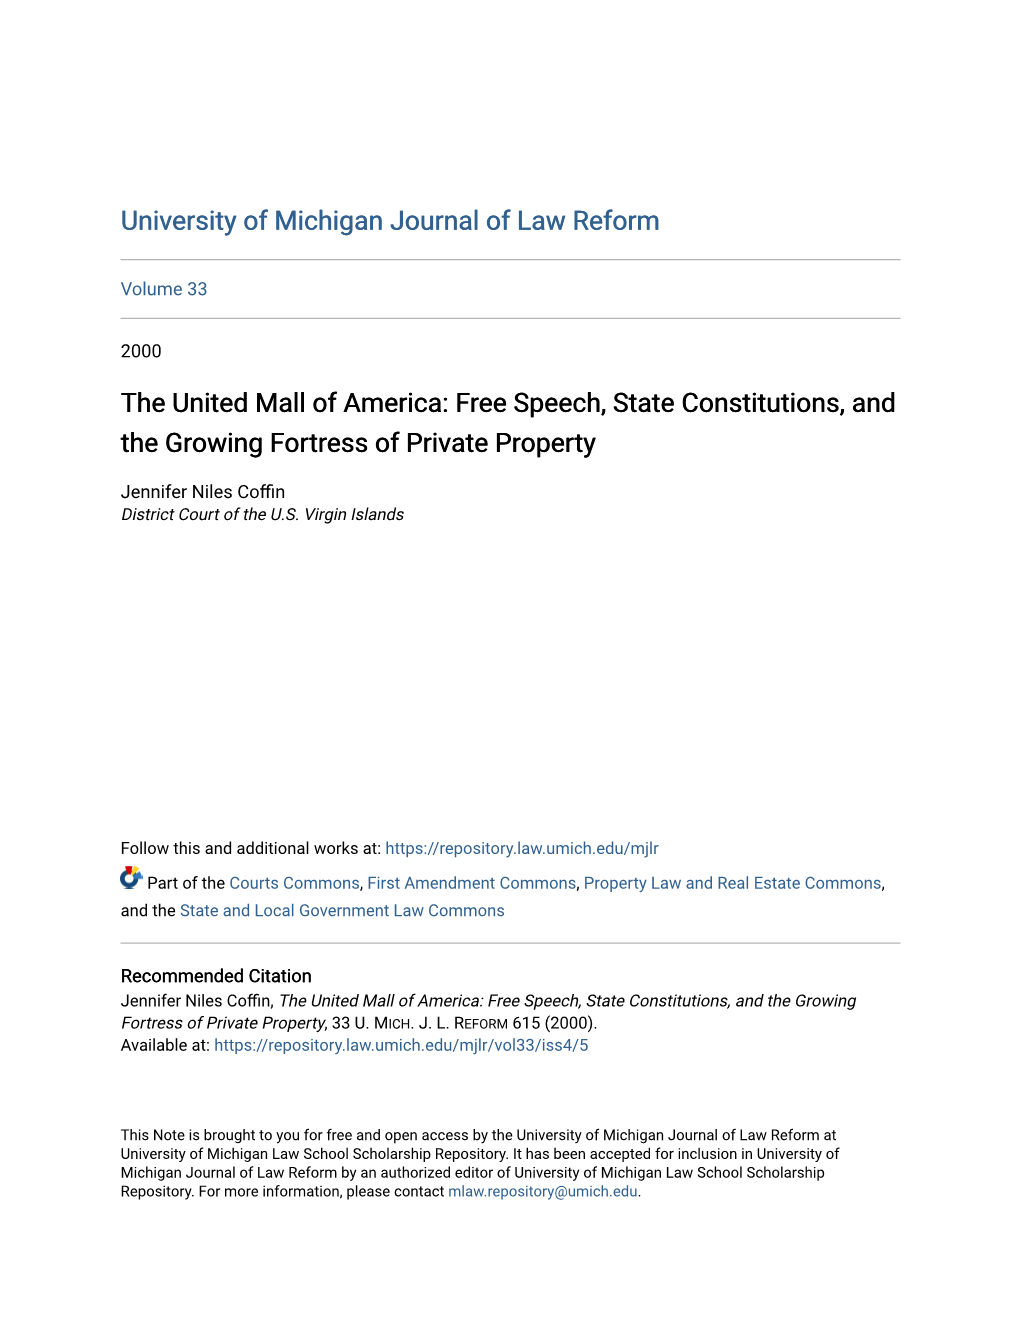 The United Mall of America: Free Speech, State Constitutions, and the Growing Fortress of Private Property